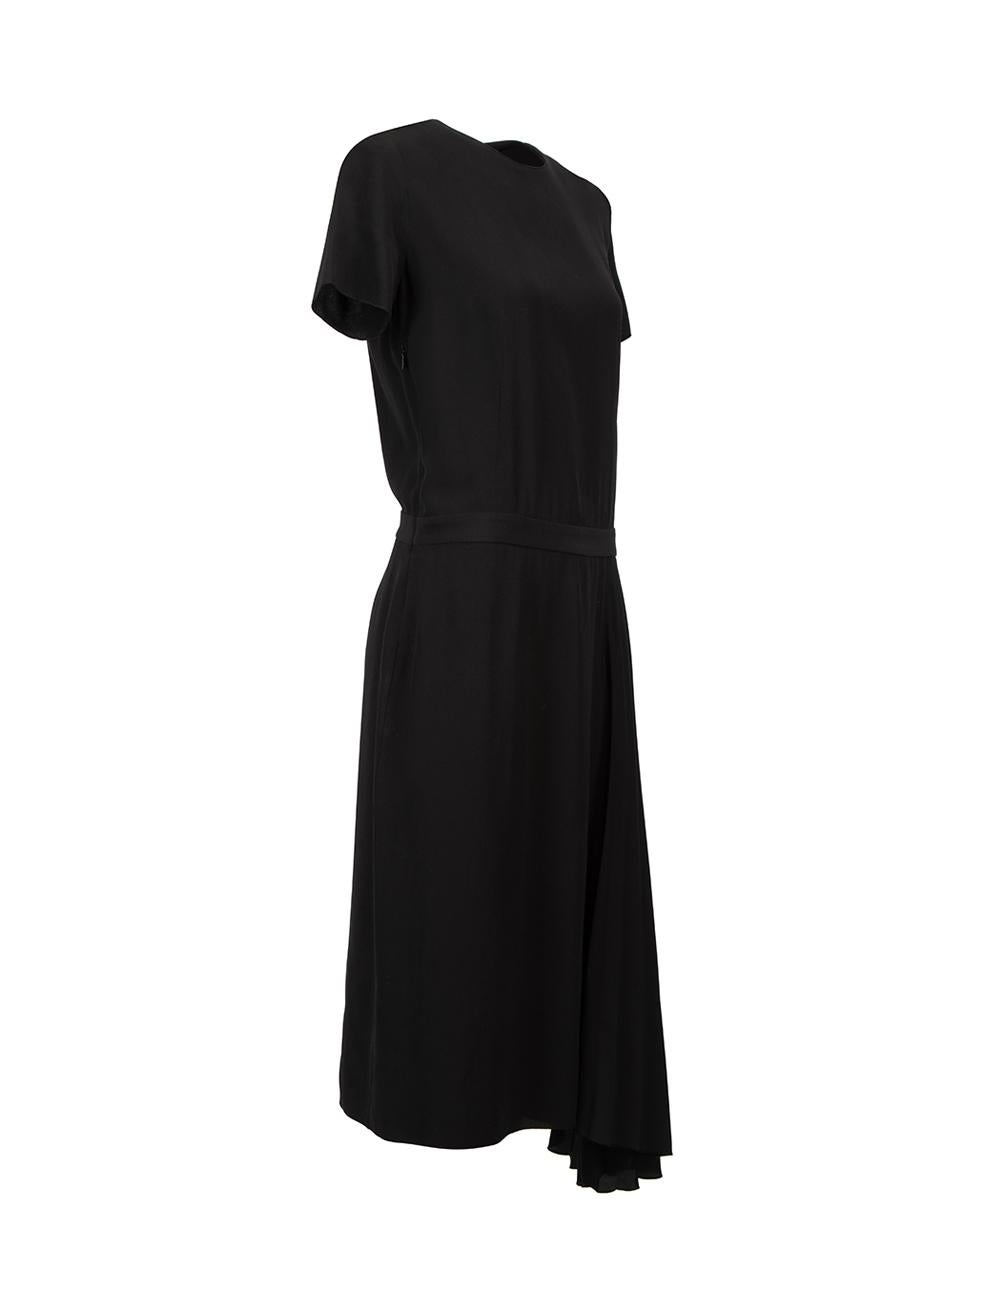 CONDITION is Very good. Hardly any visible wear to dress is evident on this used Mulberry designer resale item.



Details


Black

Silk

Midi dress

Round neckline

Pleated detail

Back keyhole neckline with button fastening

Side zip